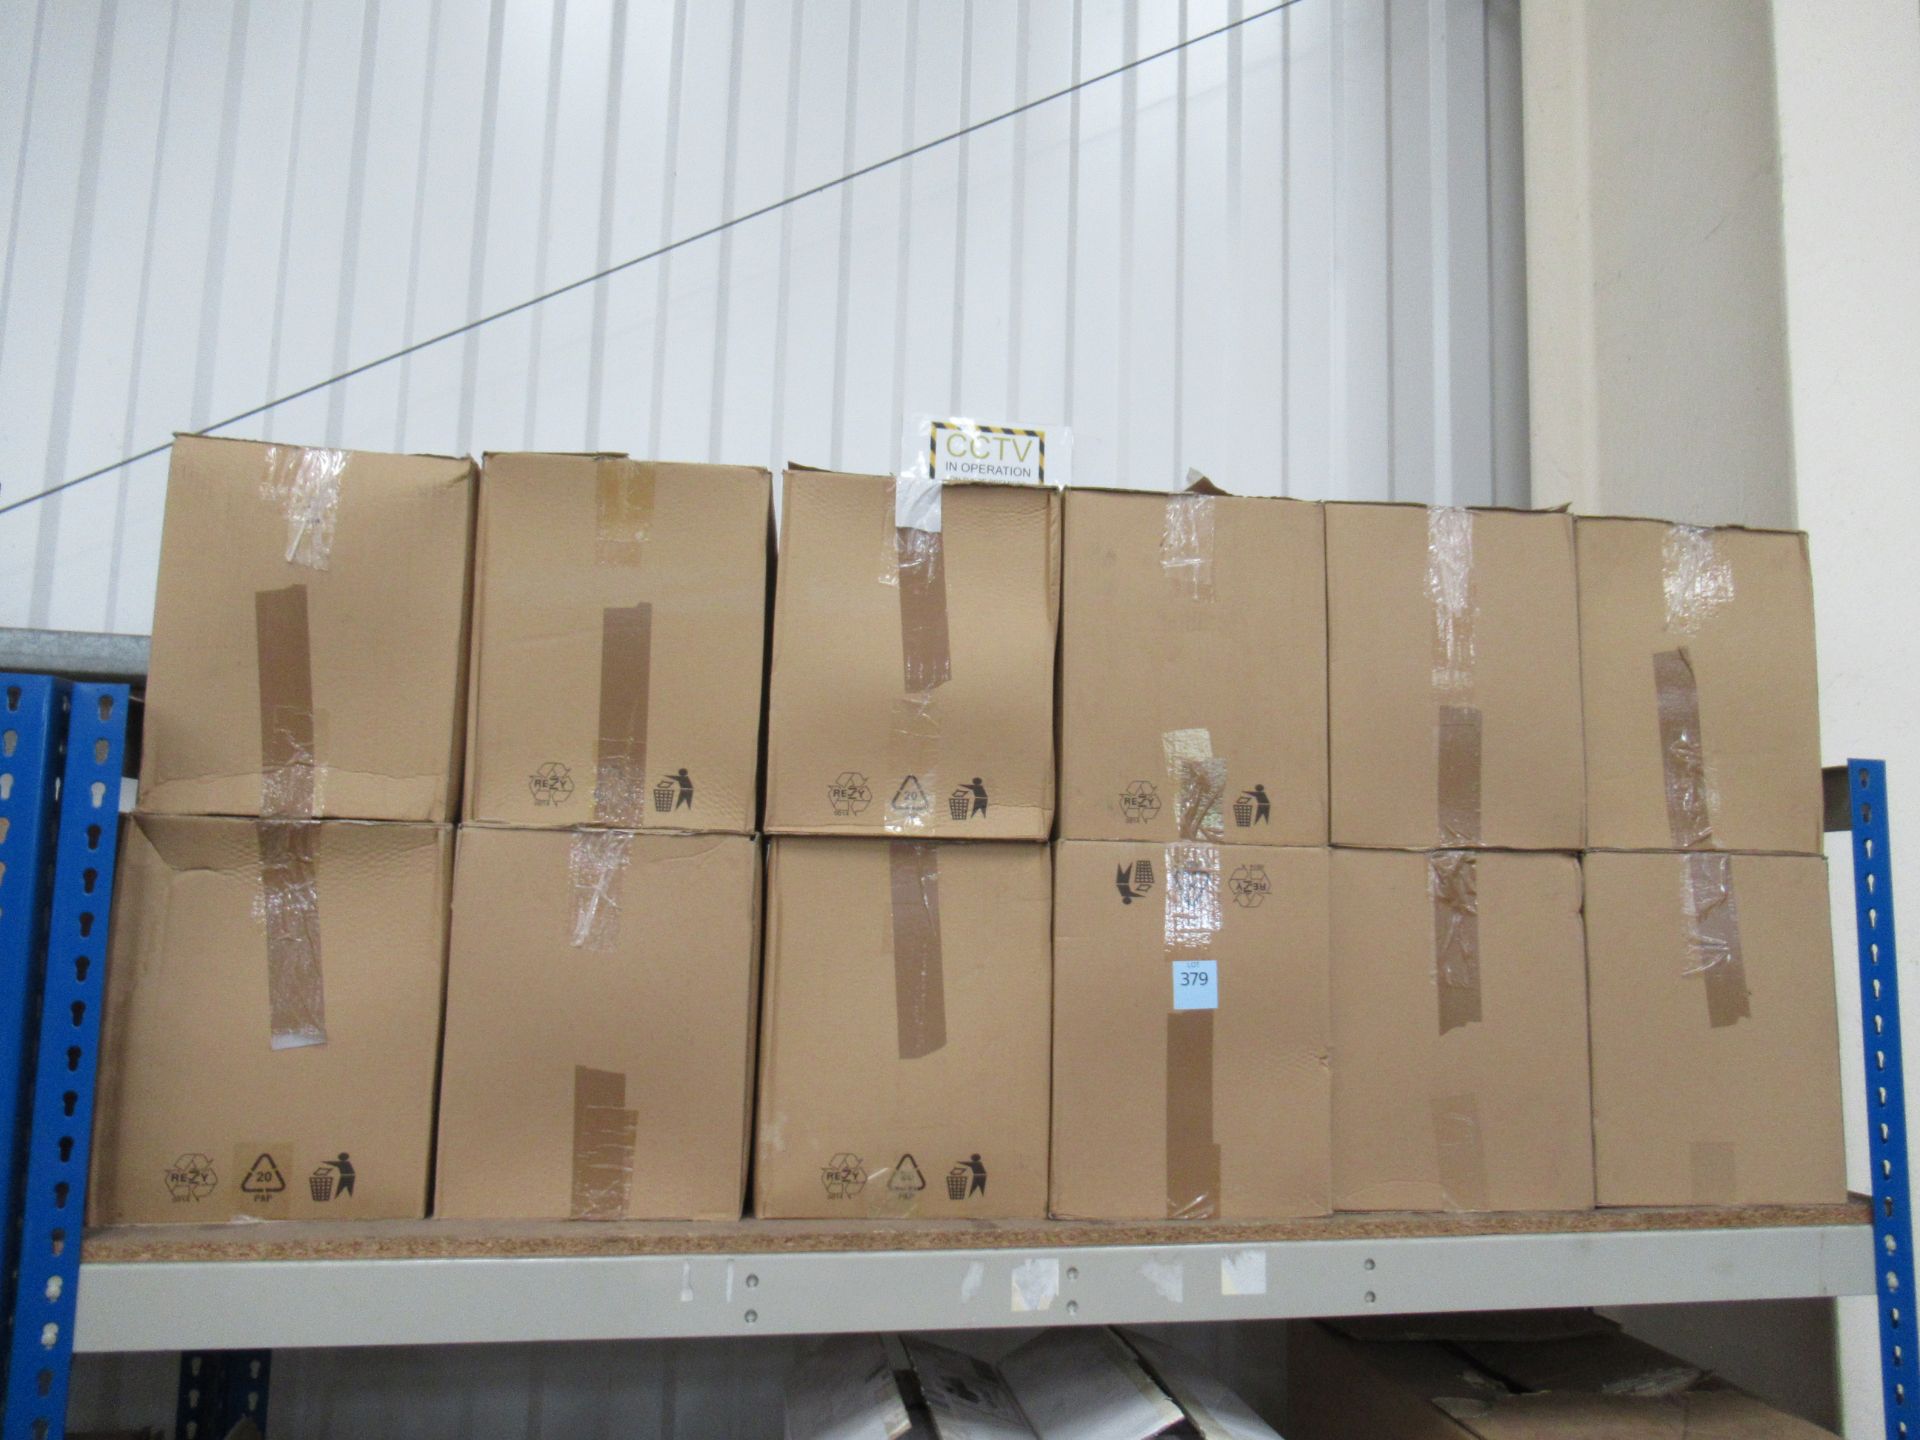 12 x Boxes of Villeroy and Boch Dummy Toilet Push Plates